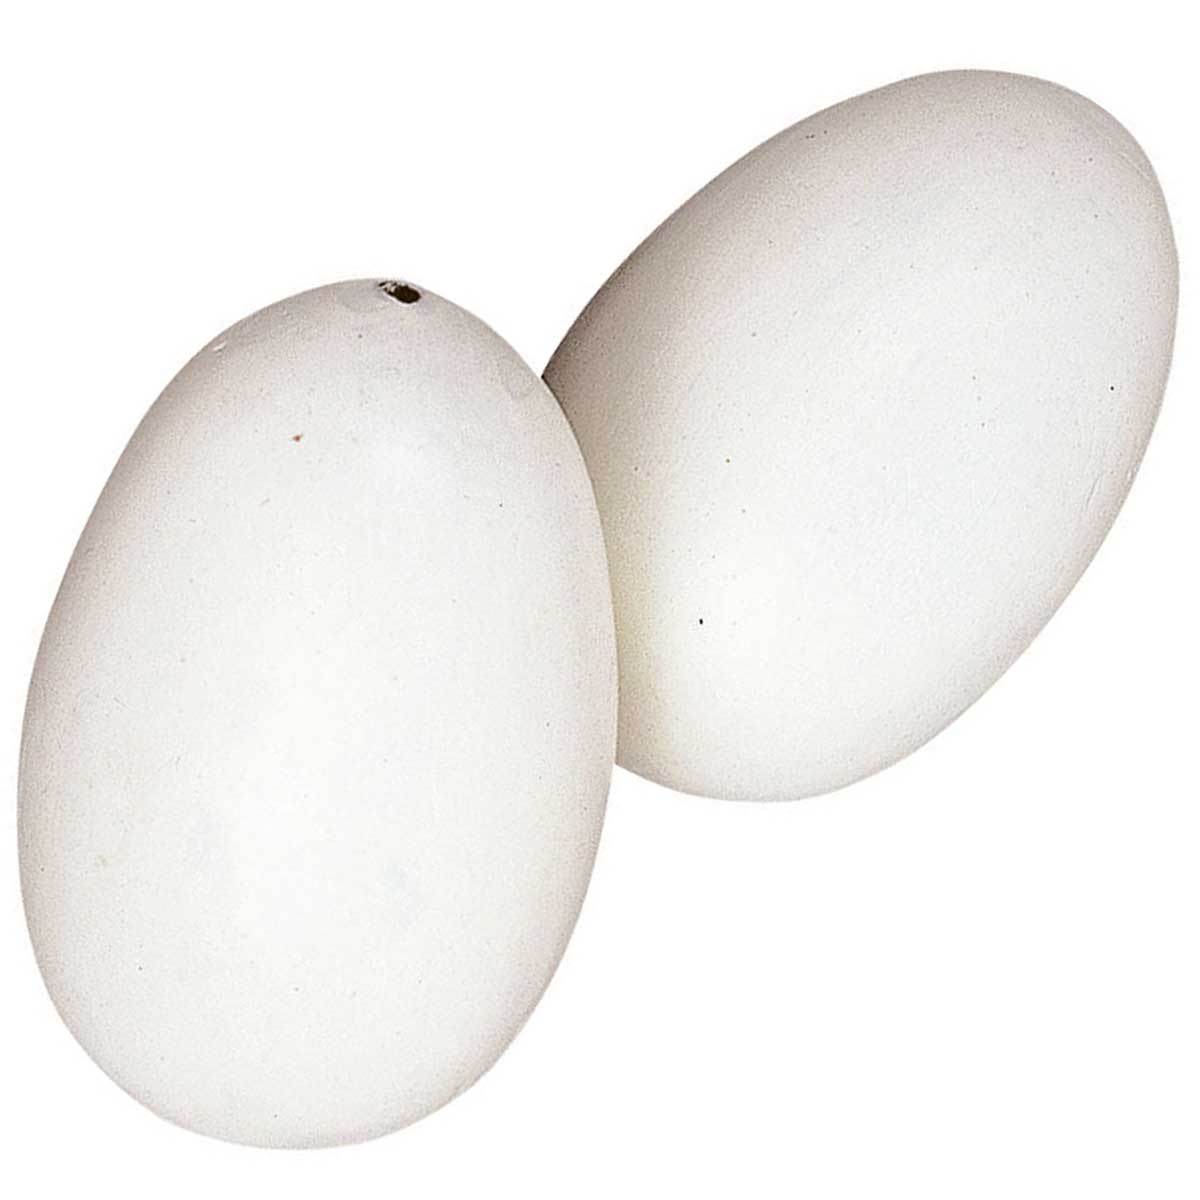 Artificial eggs for hens tone 2 pcs/pack